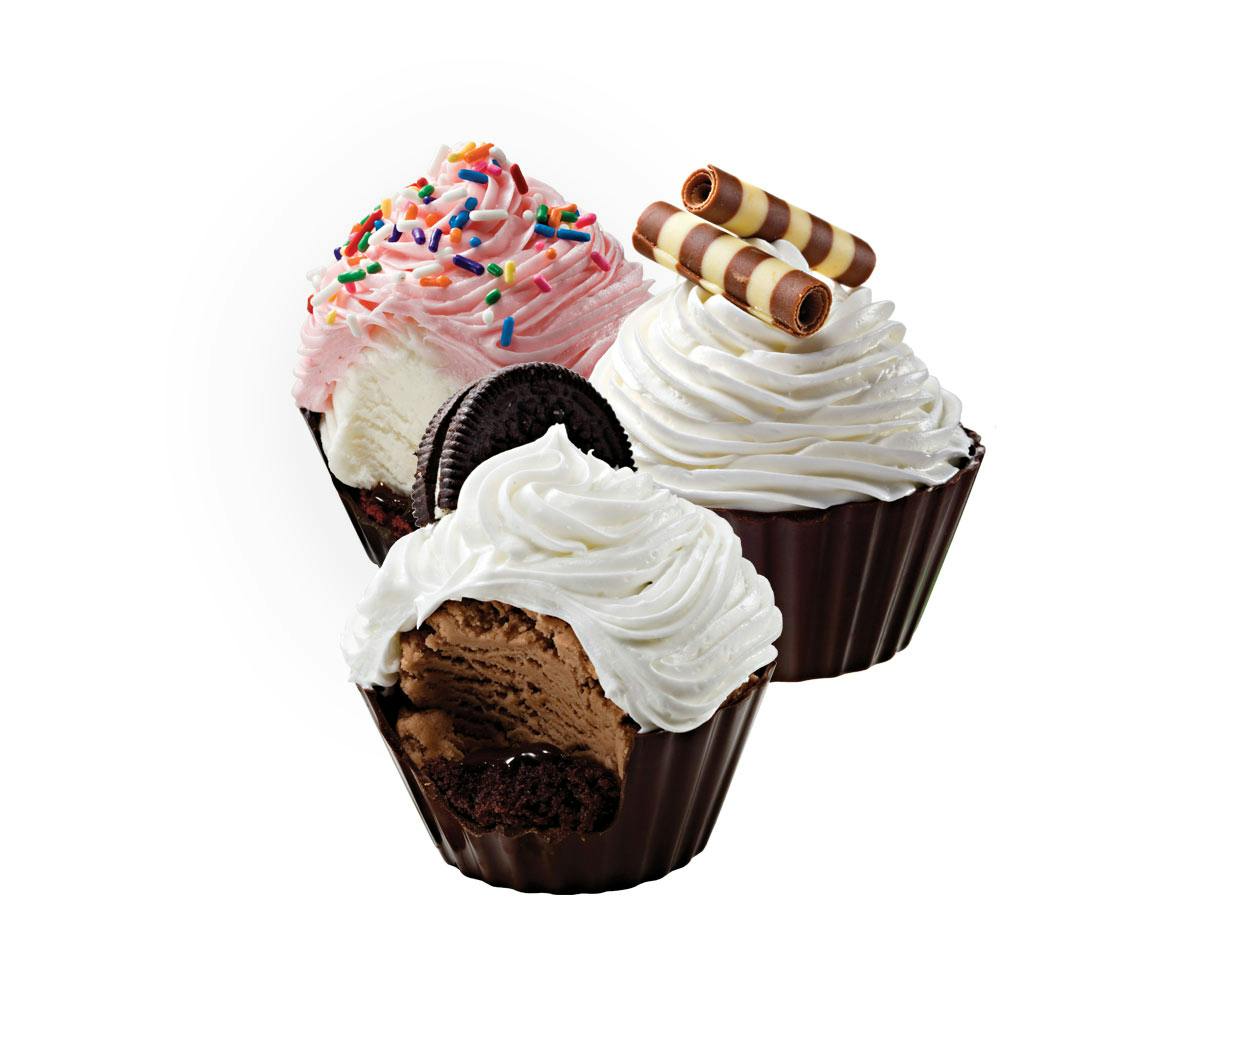 6 Pack Assorted Ice Cream Cupcakes from Cold Stone Creamery - Green Bay in Green Bay, WI